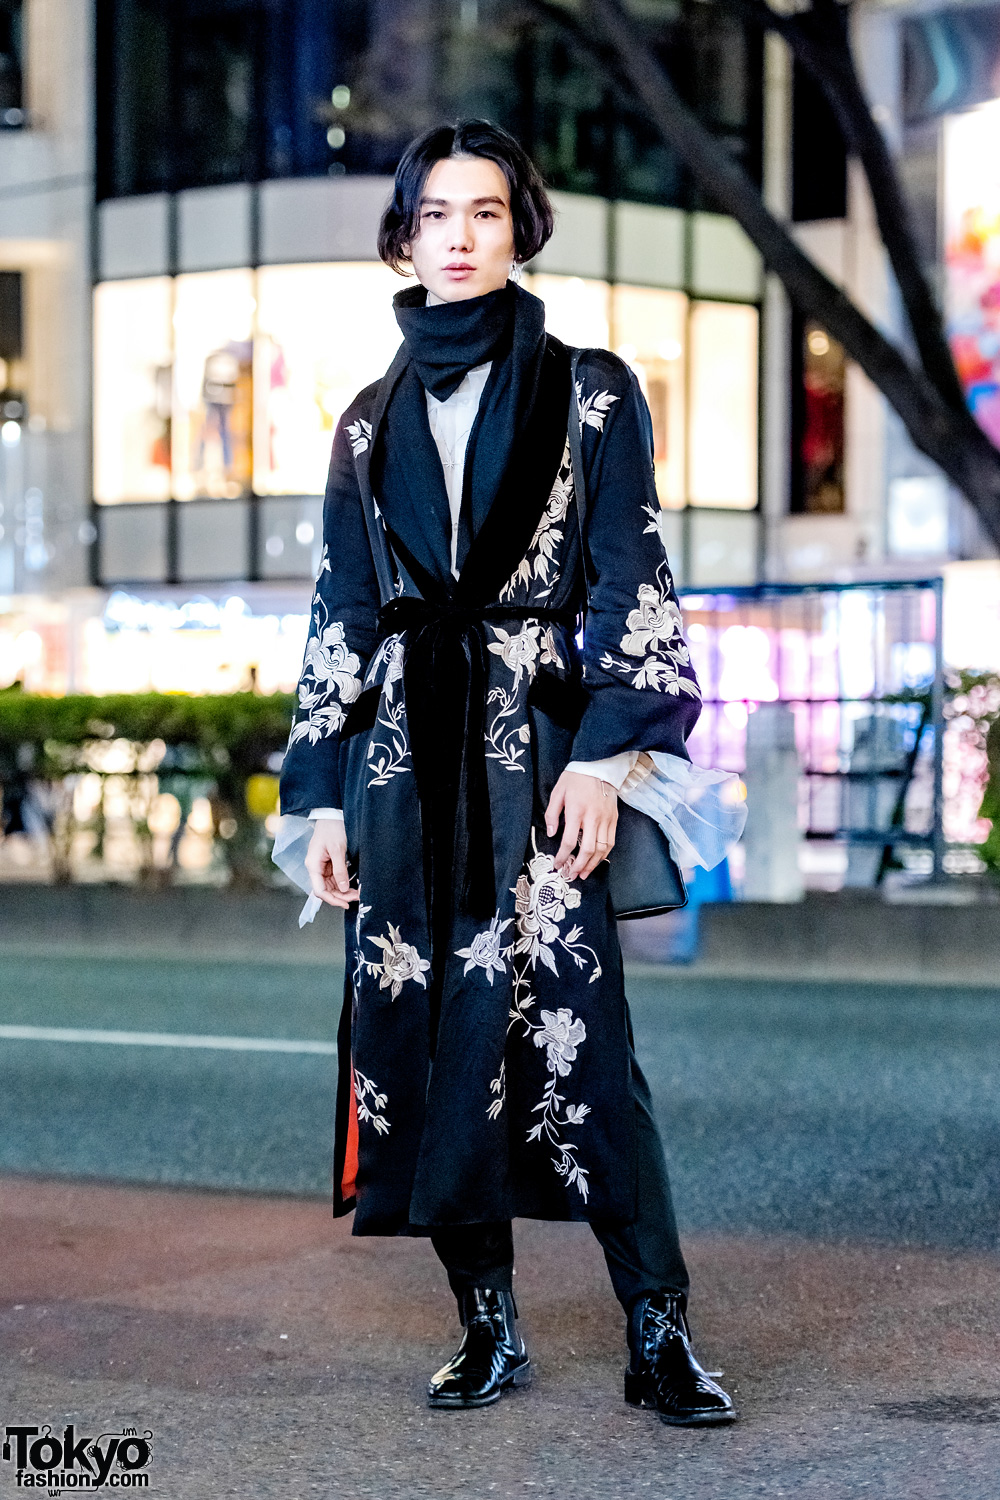 Long Black Coat w/ White Floral Embroidery Harajuku Streetwear Style